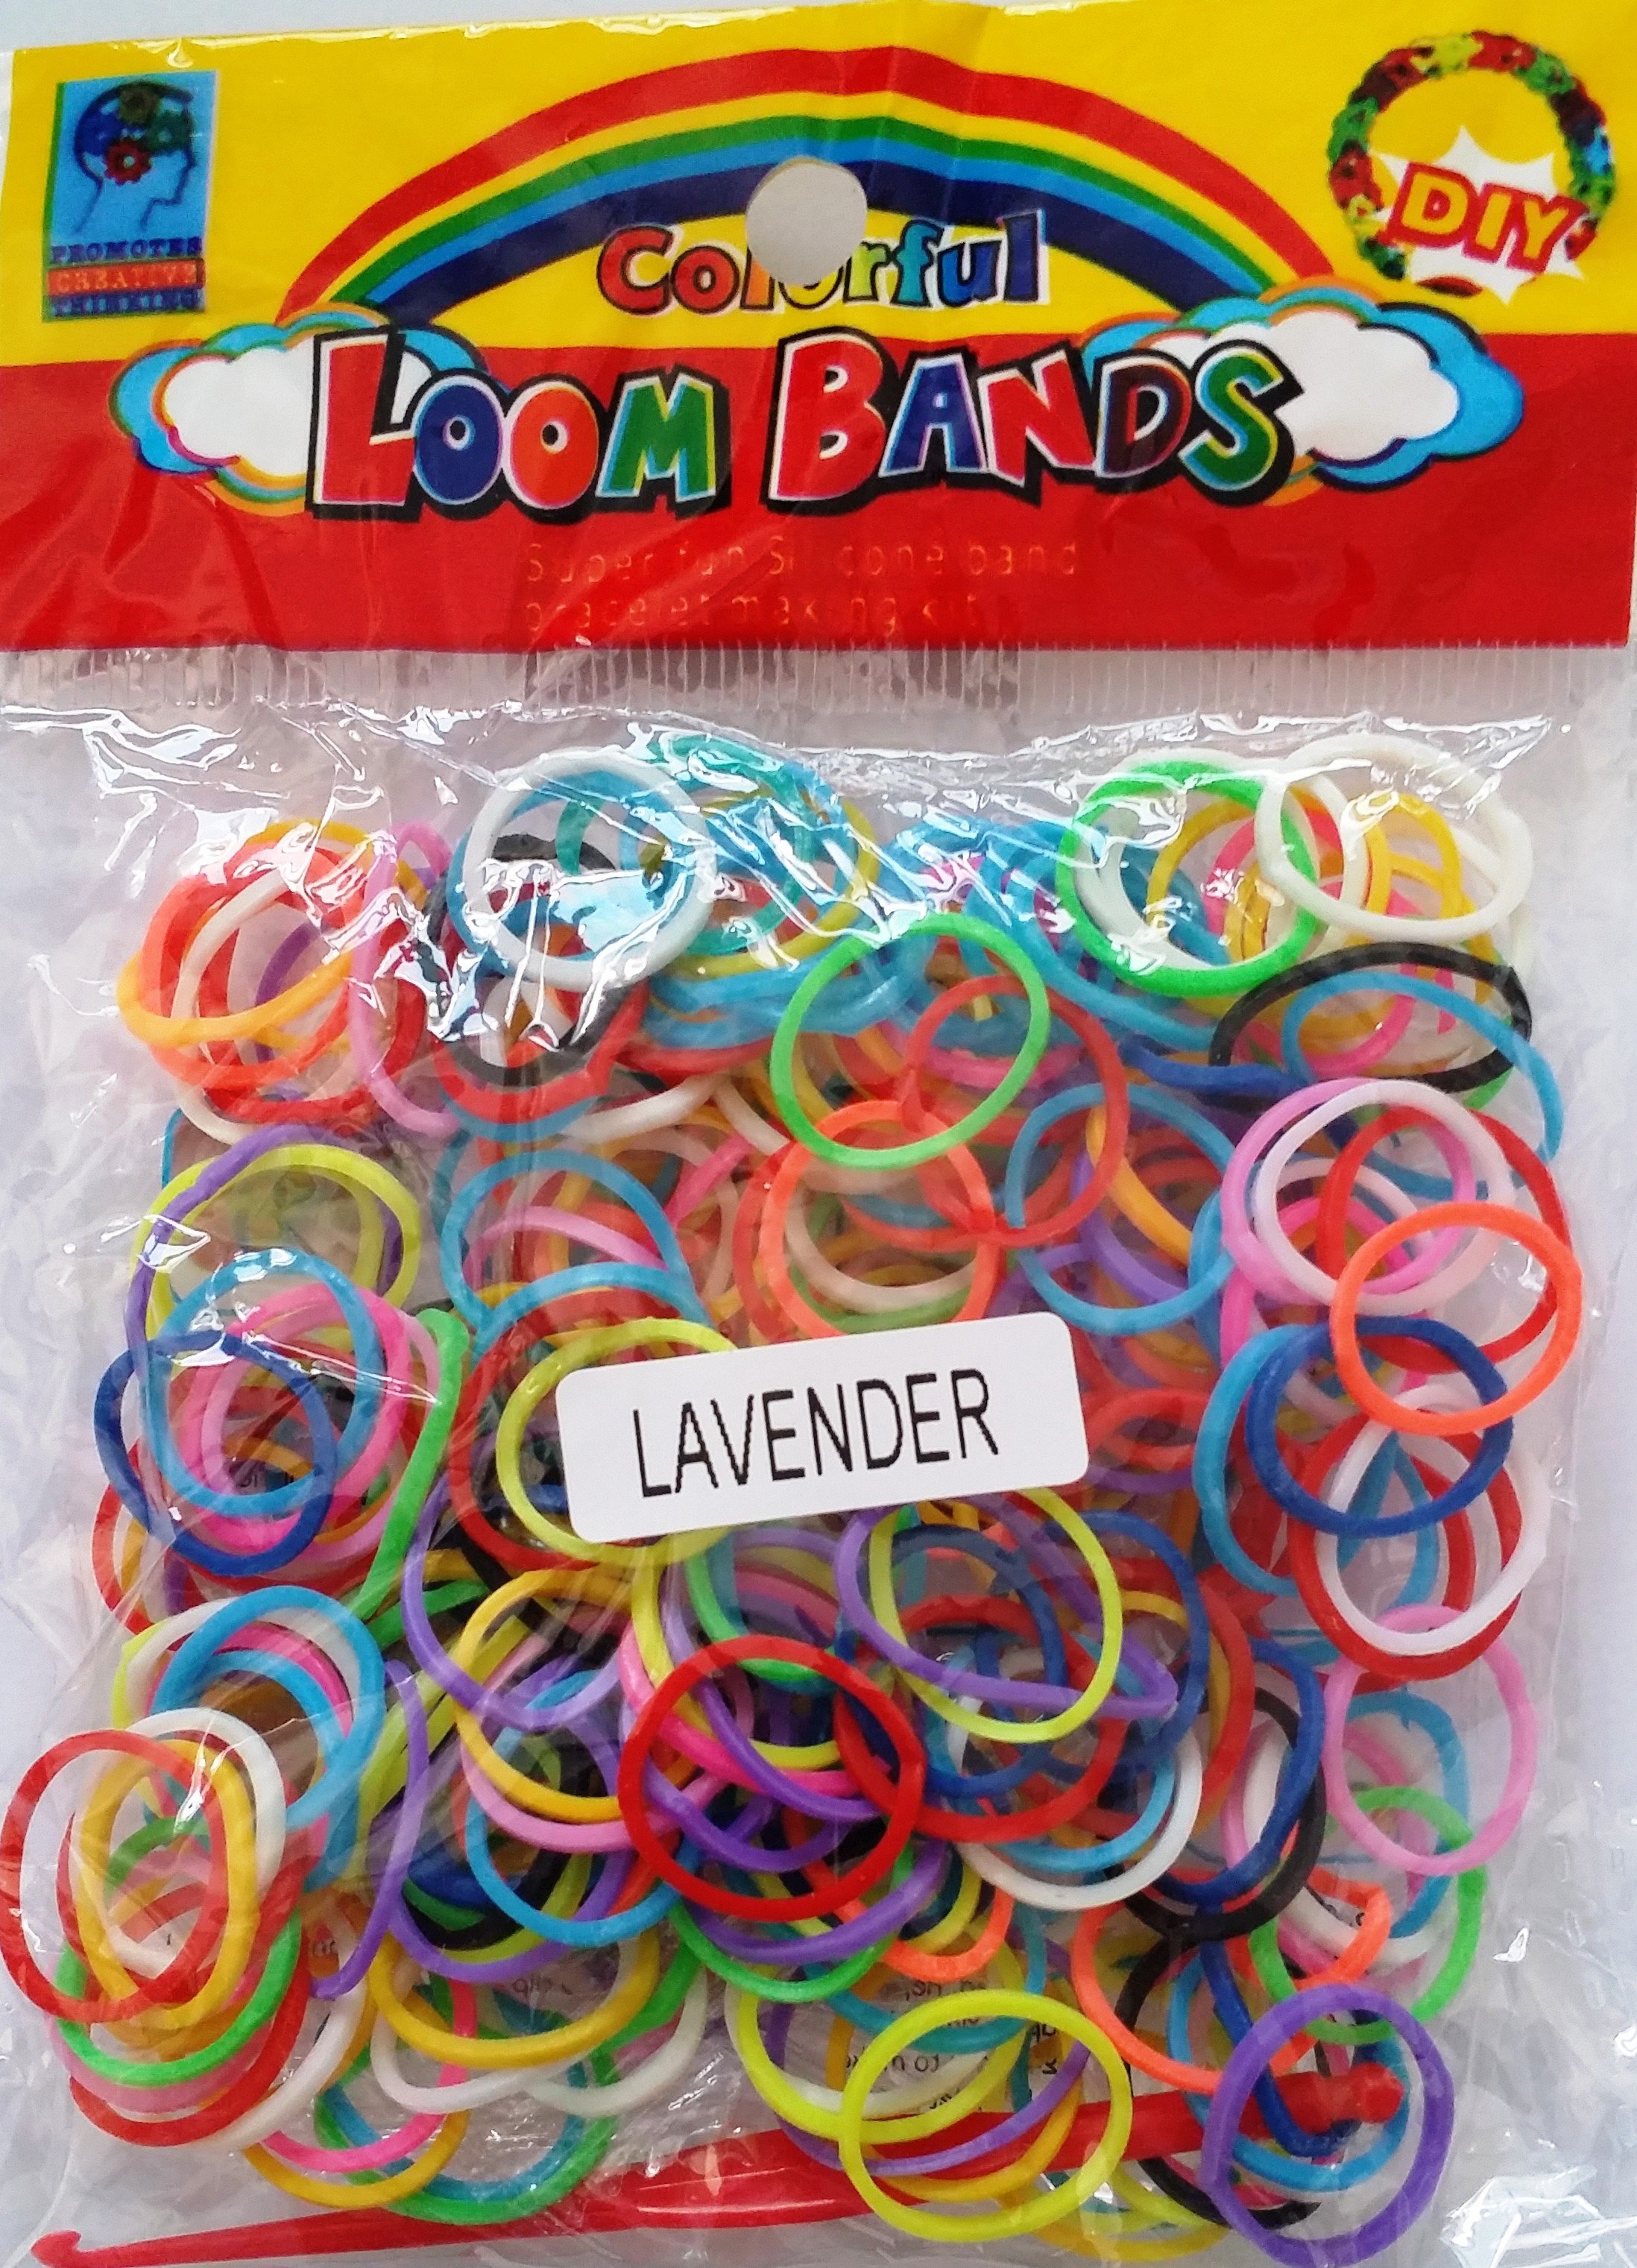 Colourful Loom Bands (Lavender Scented 300s) 12 Packs